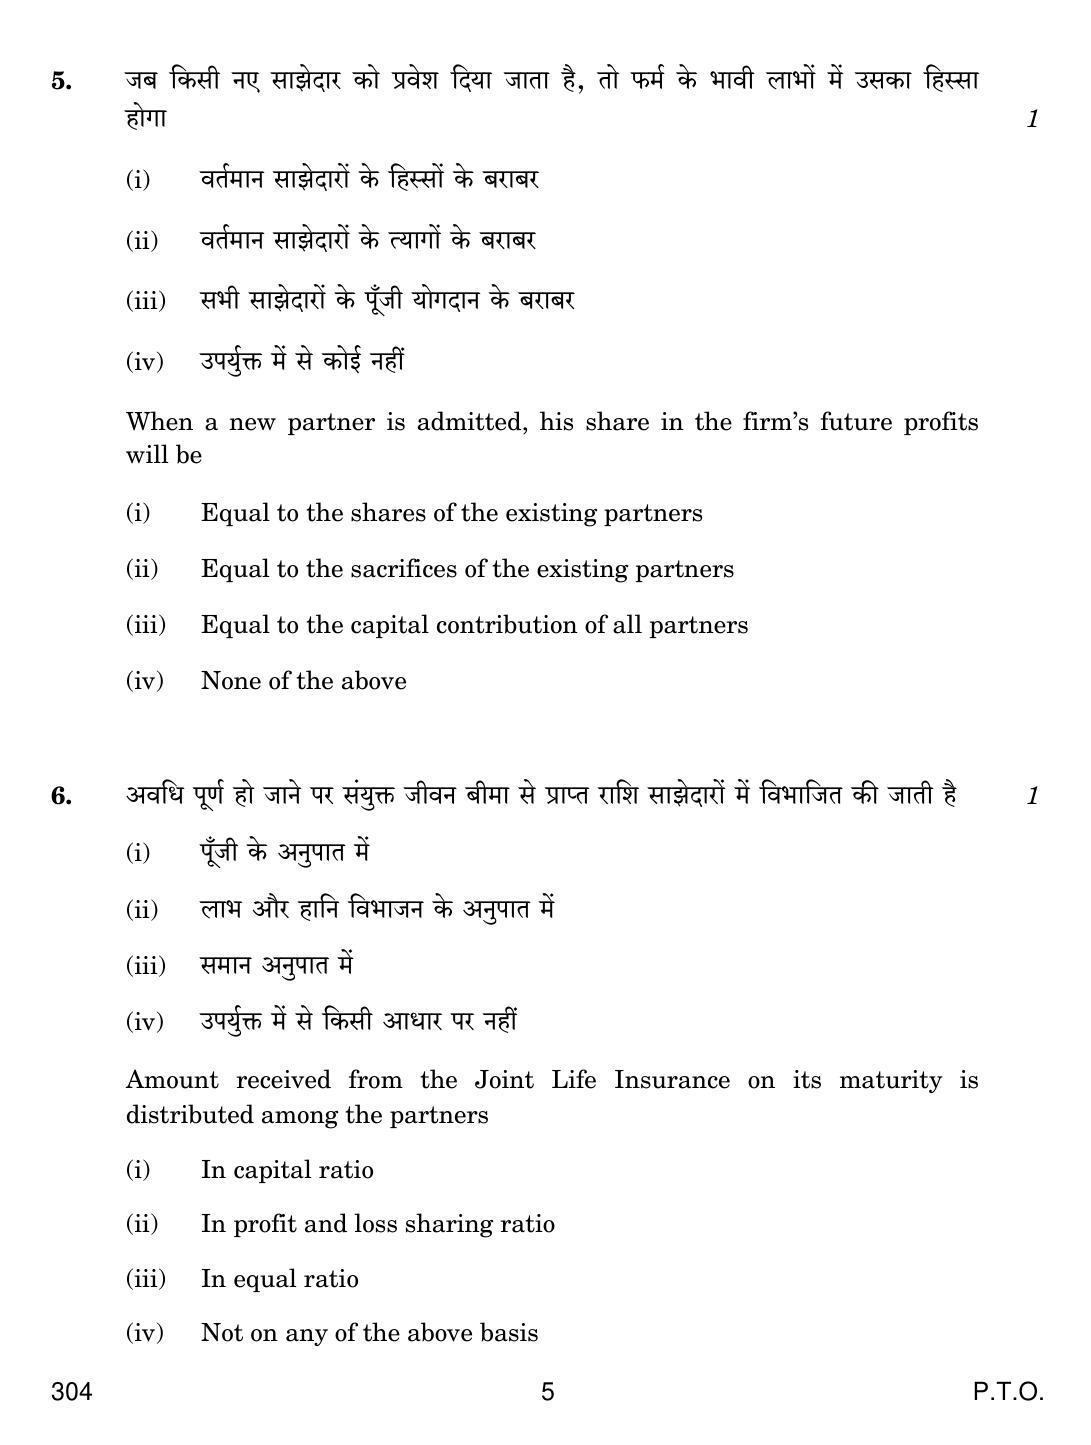 CBSE Class 12 304 FINANCIAL ACCOUNTING 2018 Question Paper - Page 5